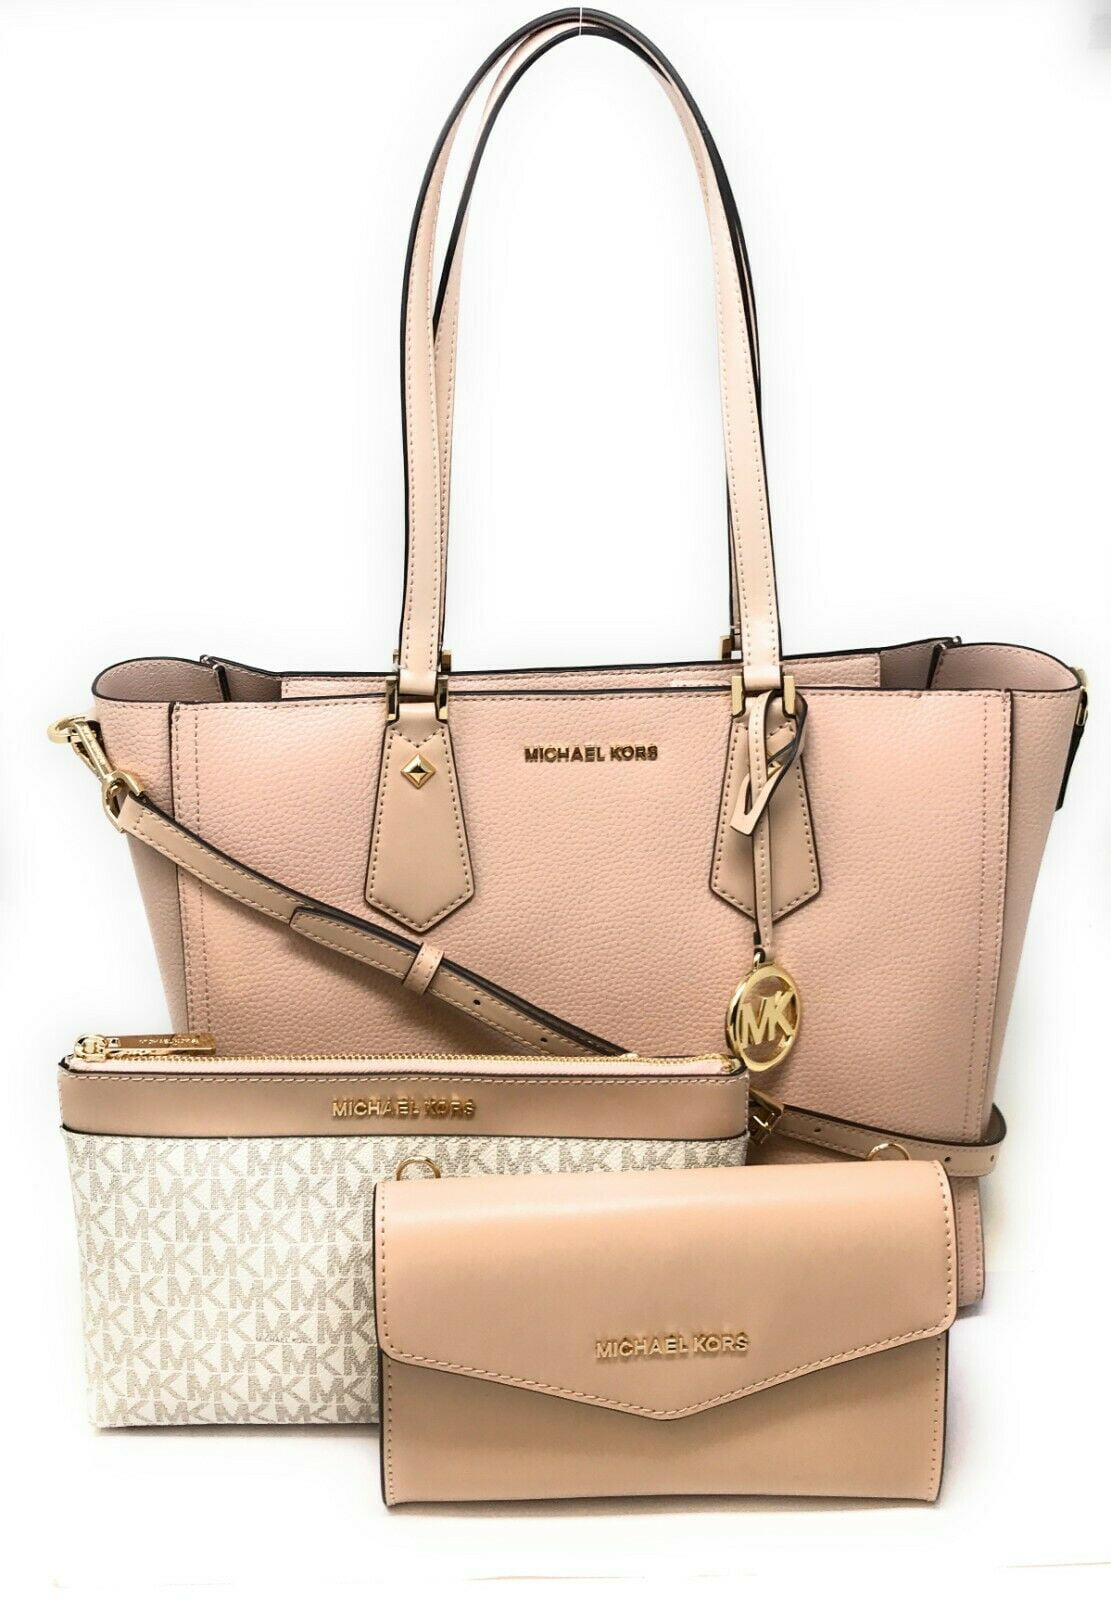 Michael Kors Kimberly 3 in 1 Leather Tote/Crossbody/Clutch in Ballet ...